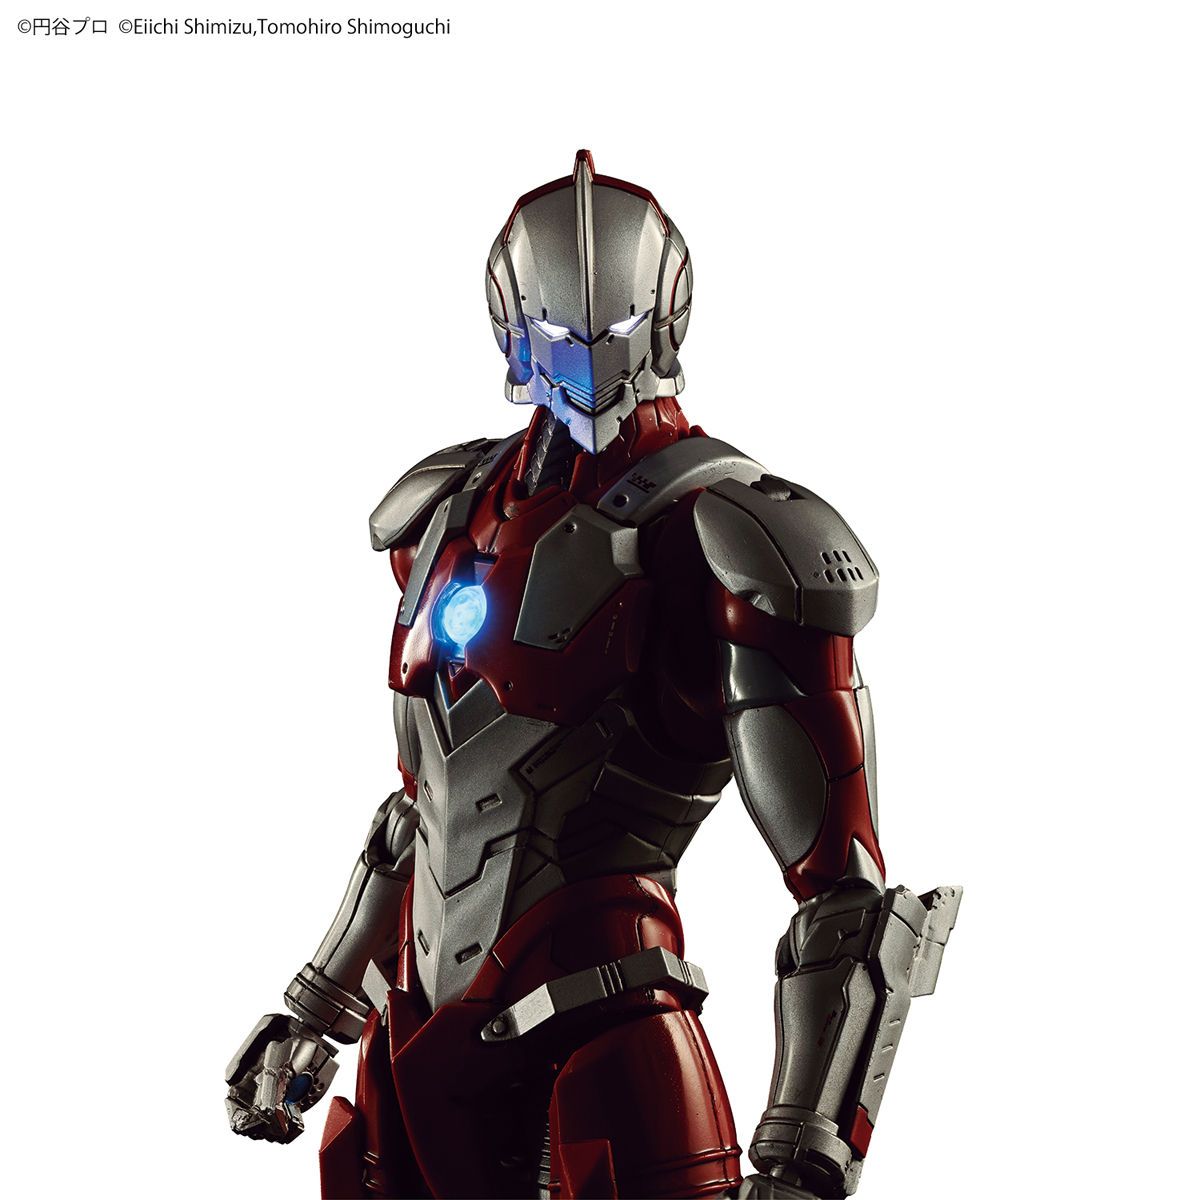 Figure-rise Standard Ultraman [B-Type] 1/12 Scale Model - First Printing w/ Limited Edition Poster